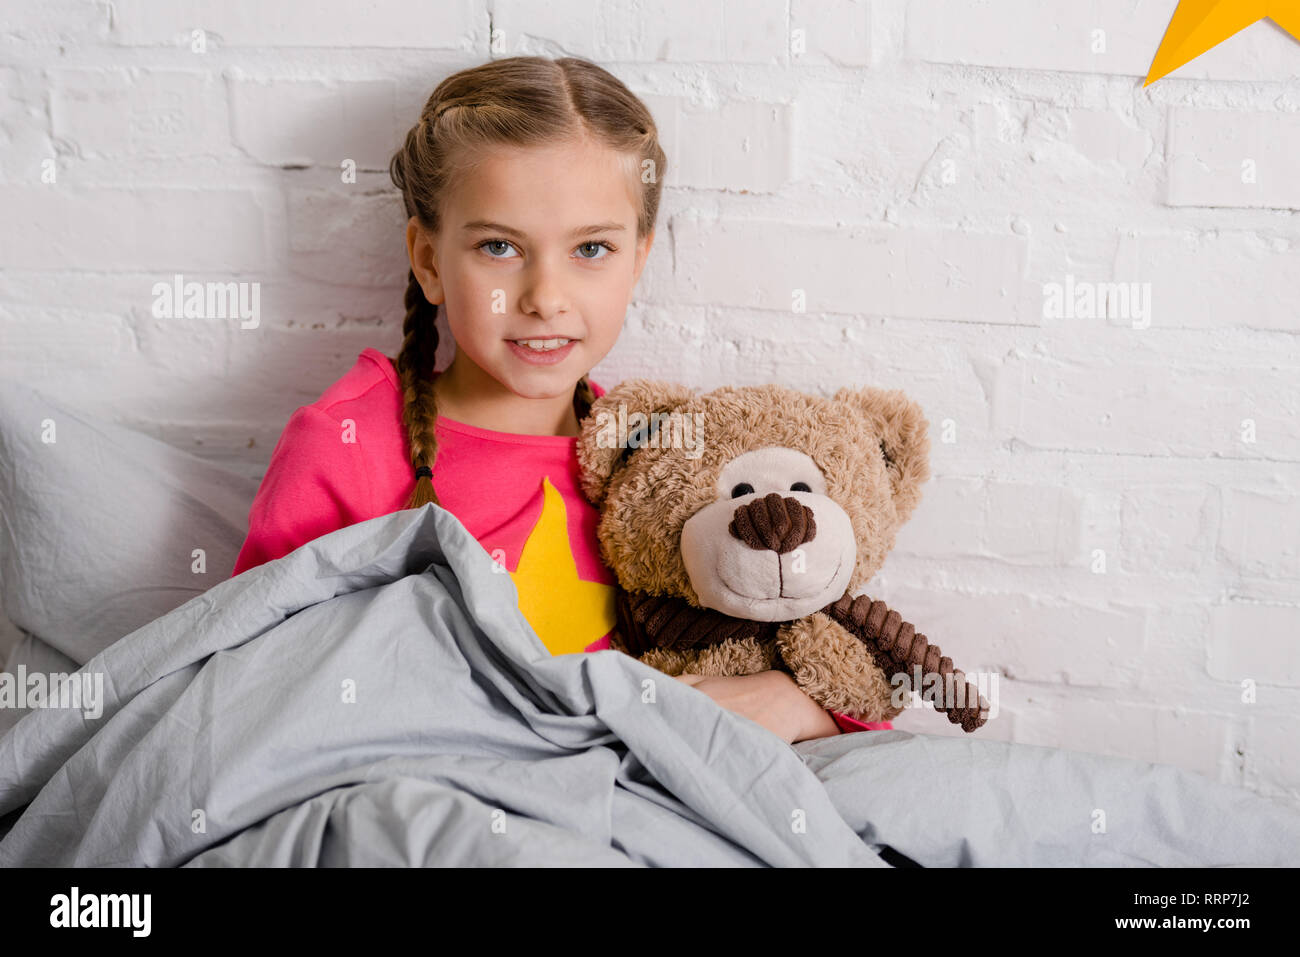 Curious kid with braids holding teddy bear in bed Stock Photo